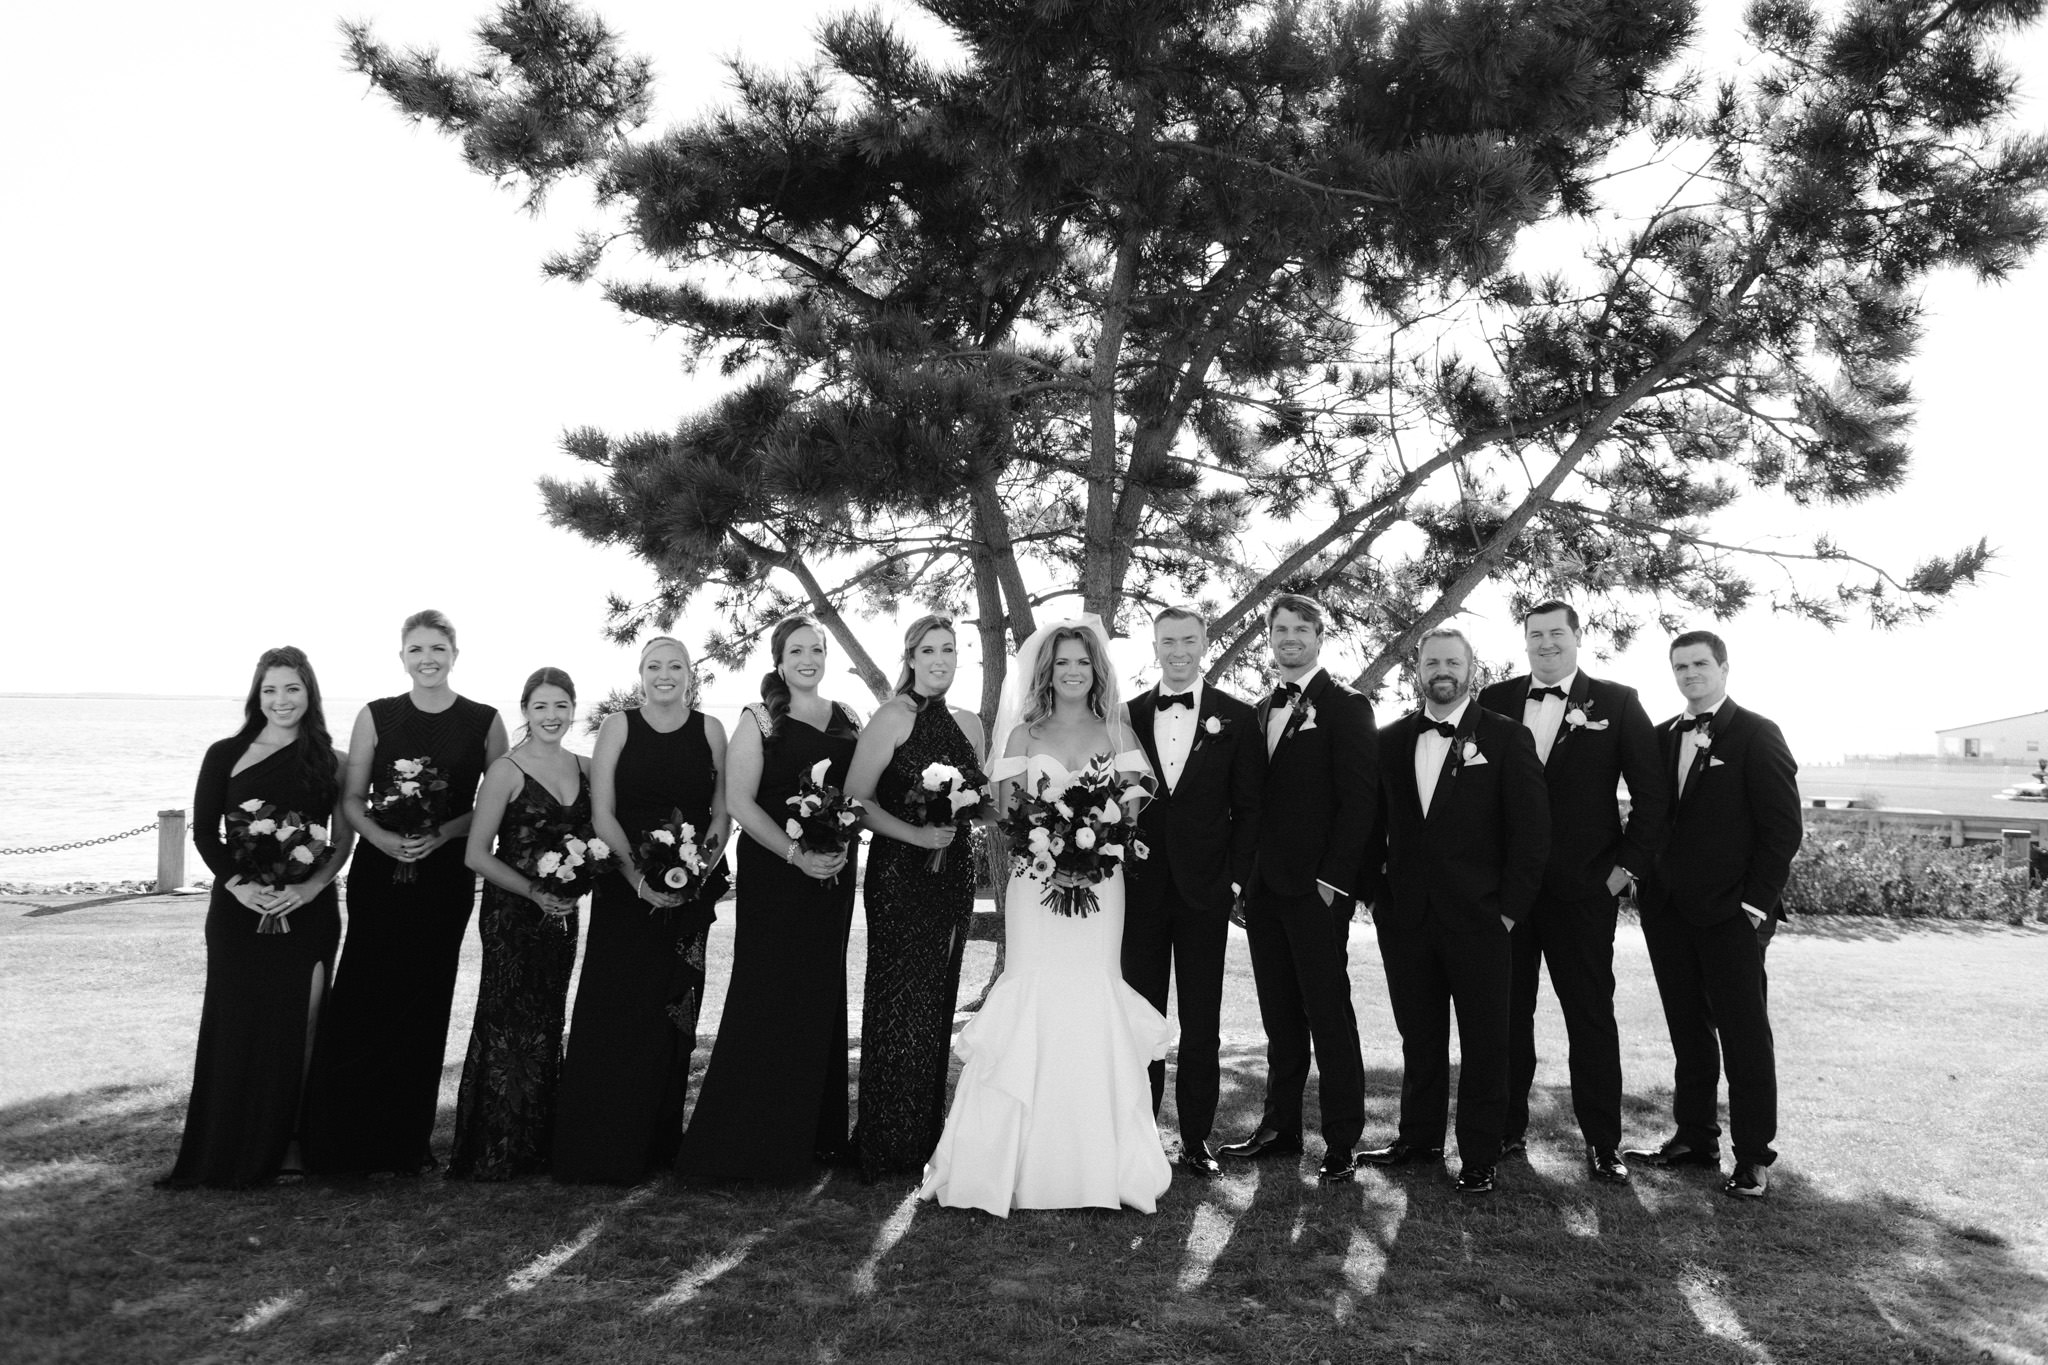 Bride and groom with their entire wedding party